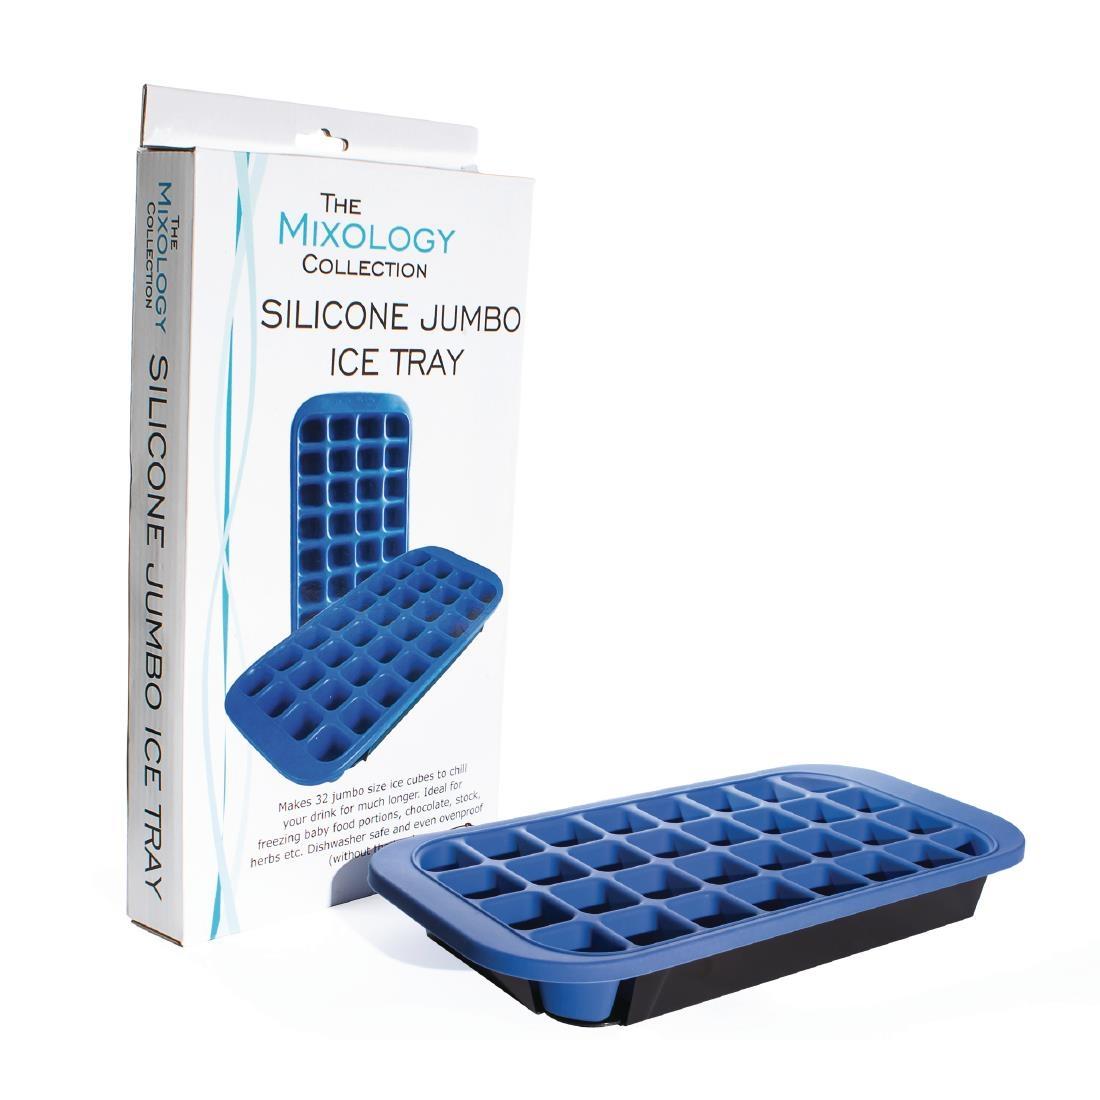 Silicone Ice Tray 32 Cubes - CS550  - 2